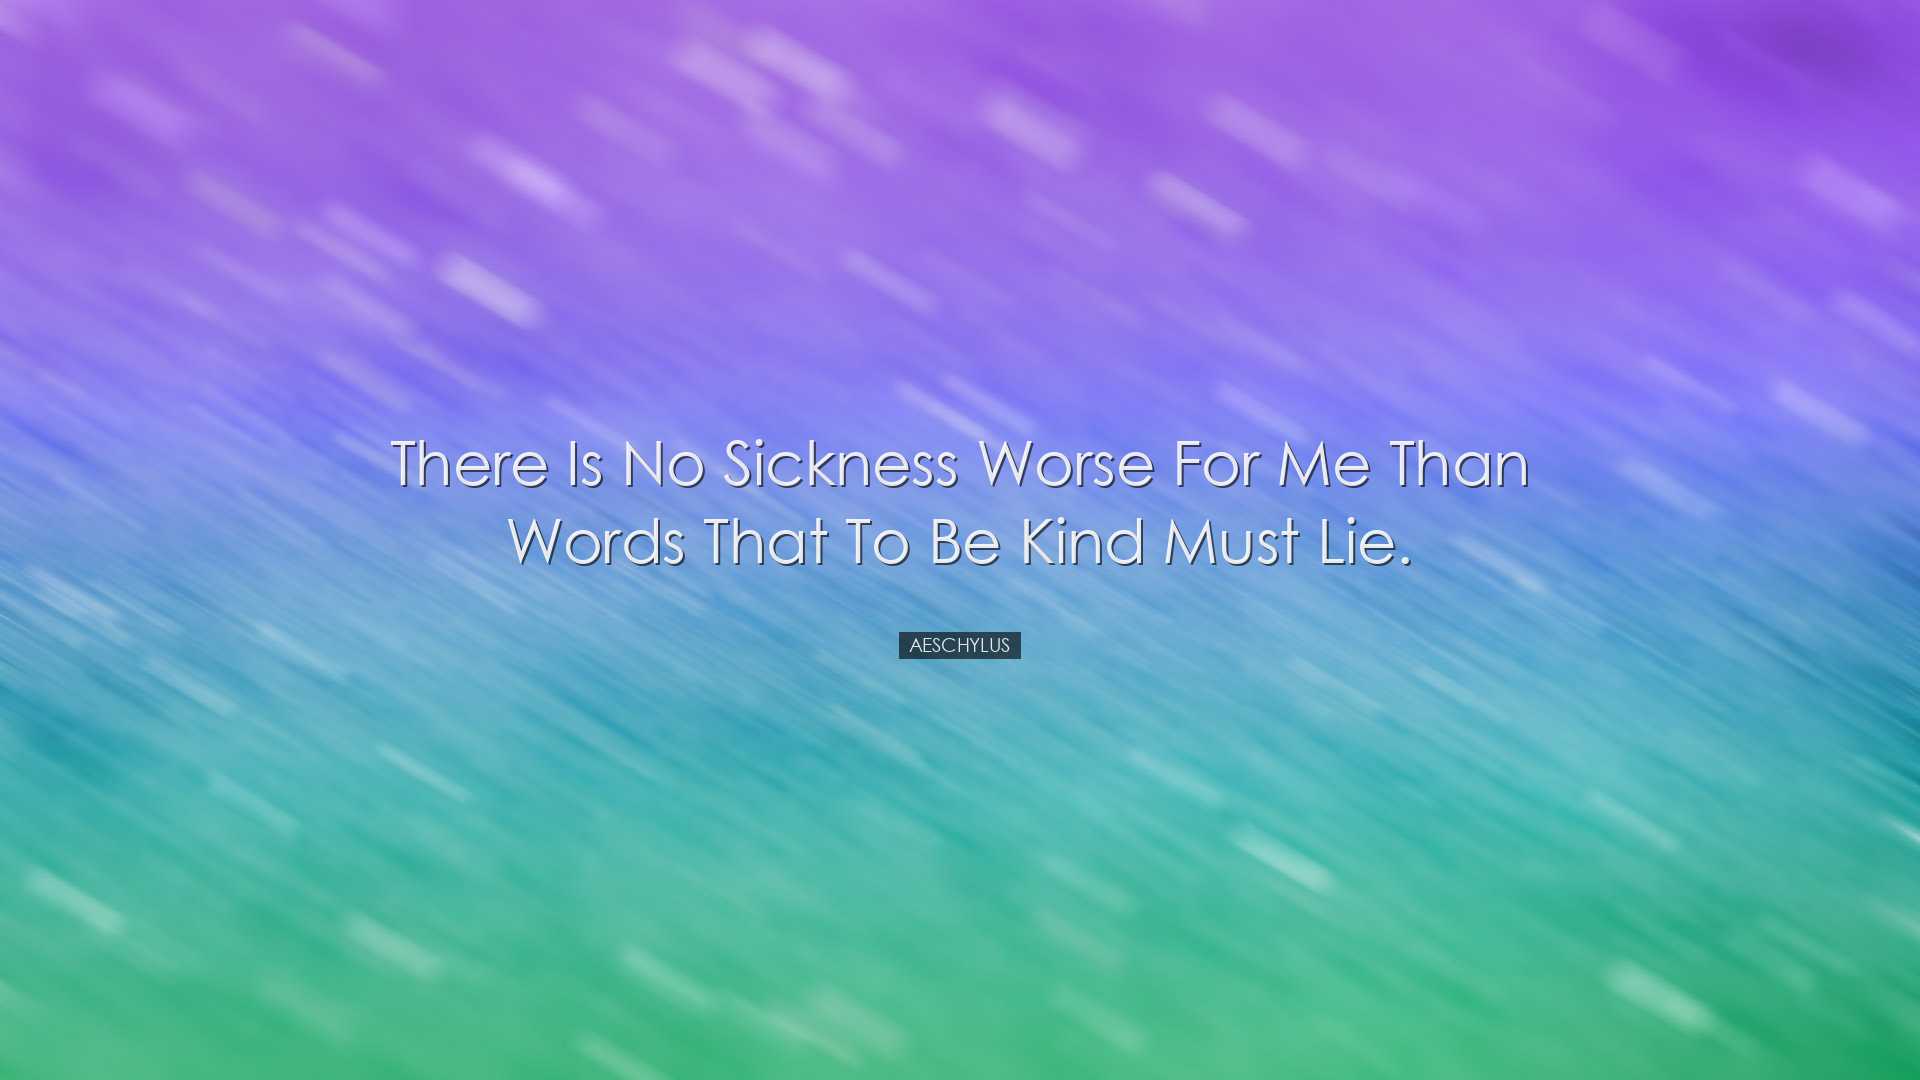 There is no sickness worse for me than words that to be kind must